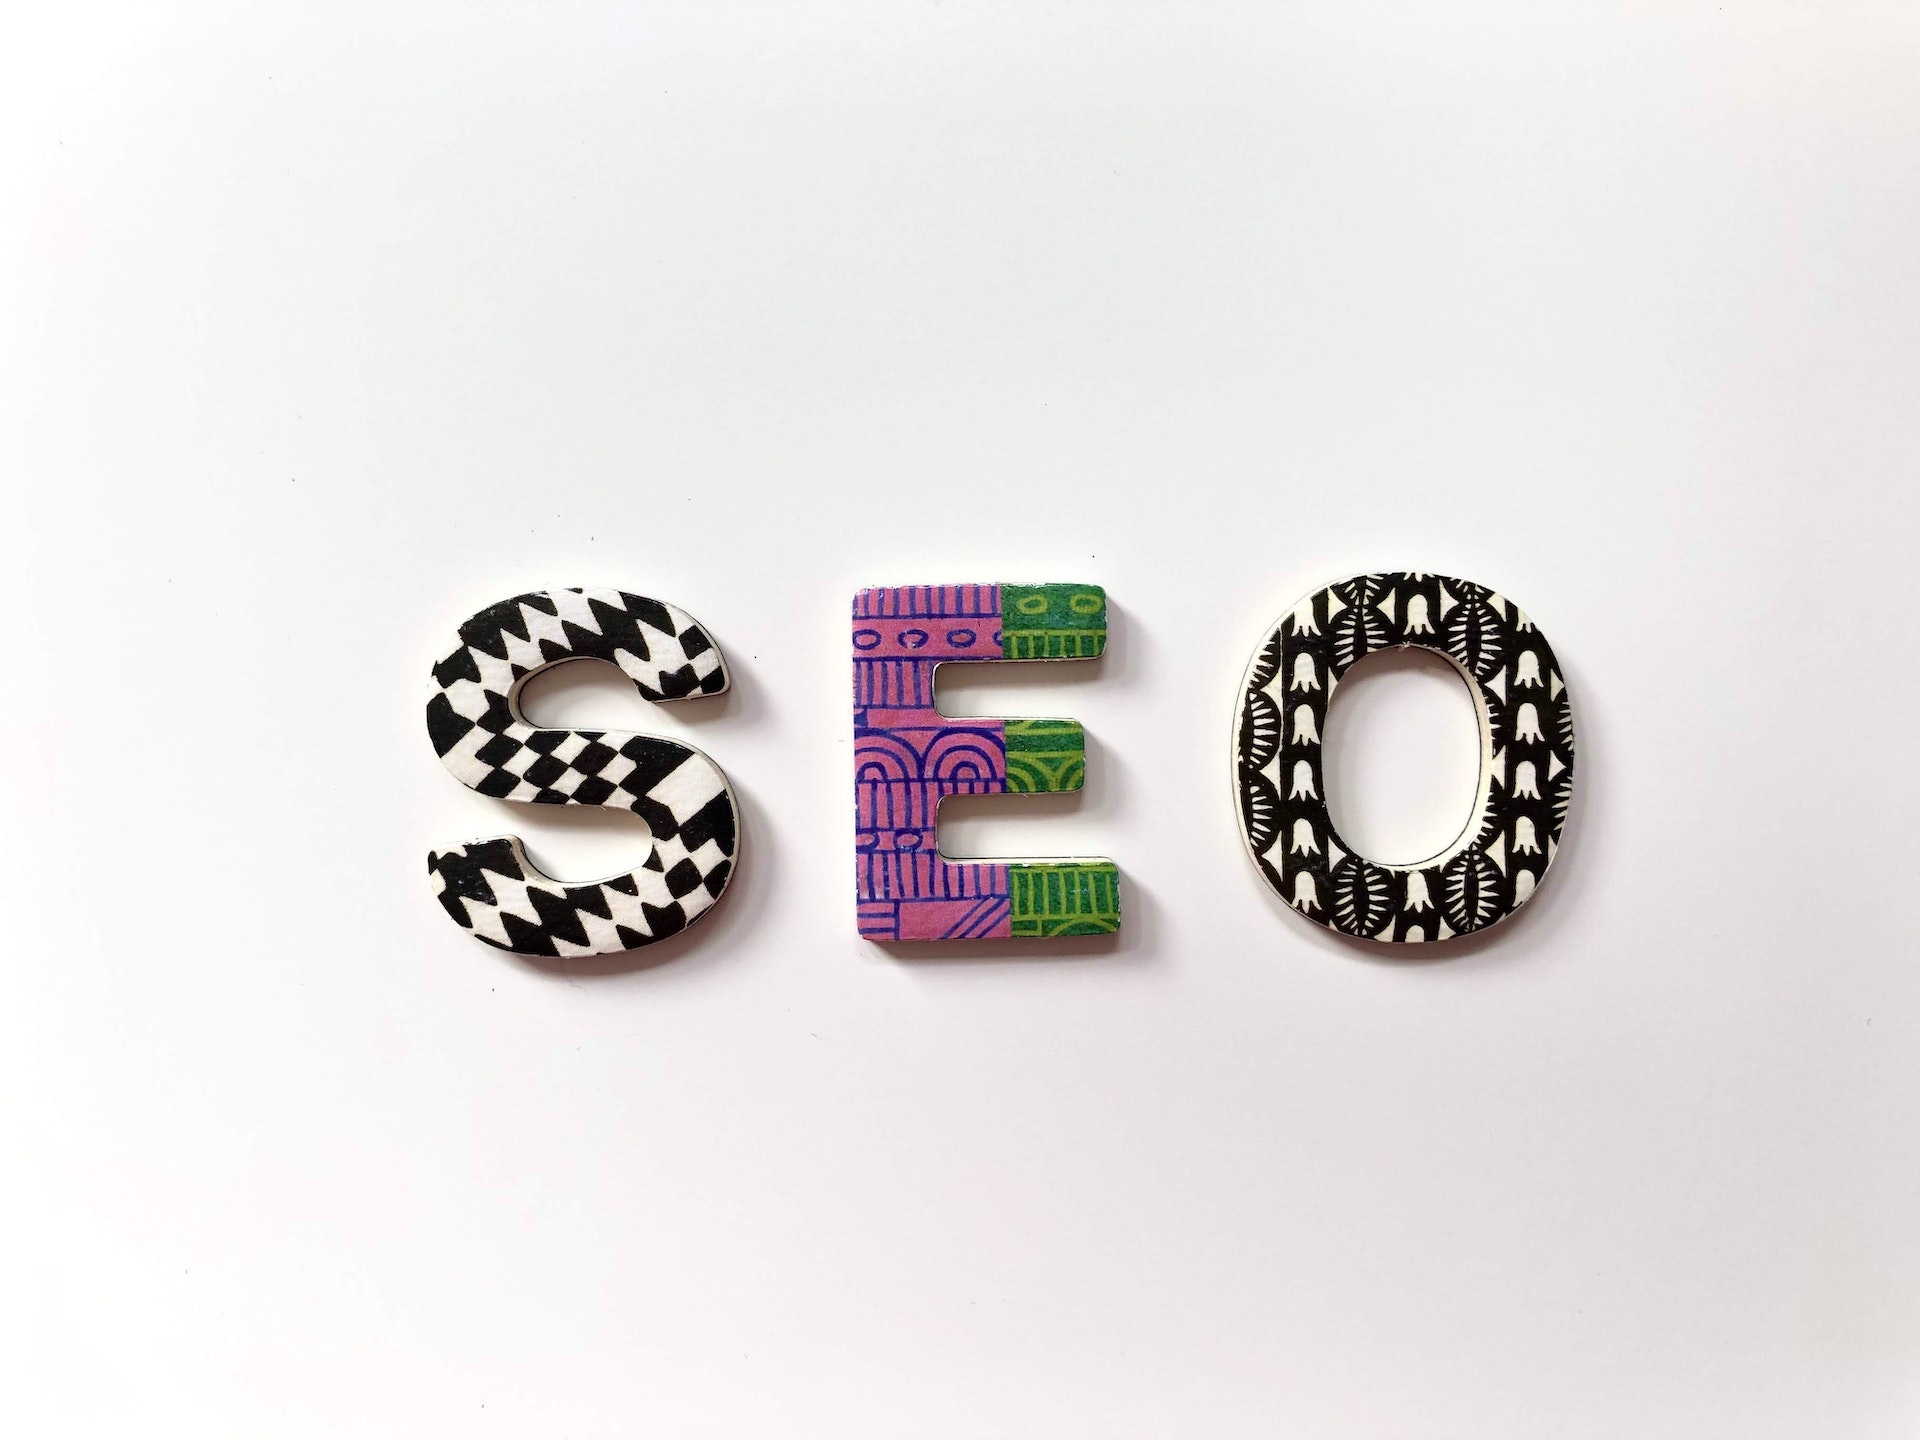 symbols of three letters, S, E, and O to read as SEO